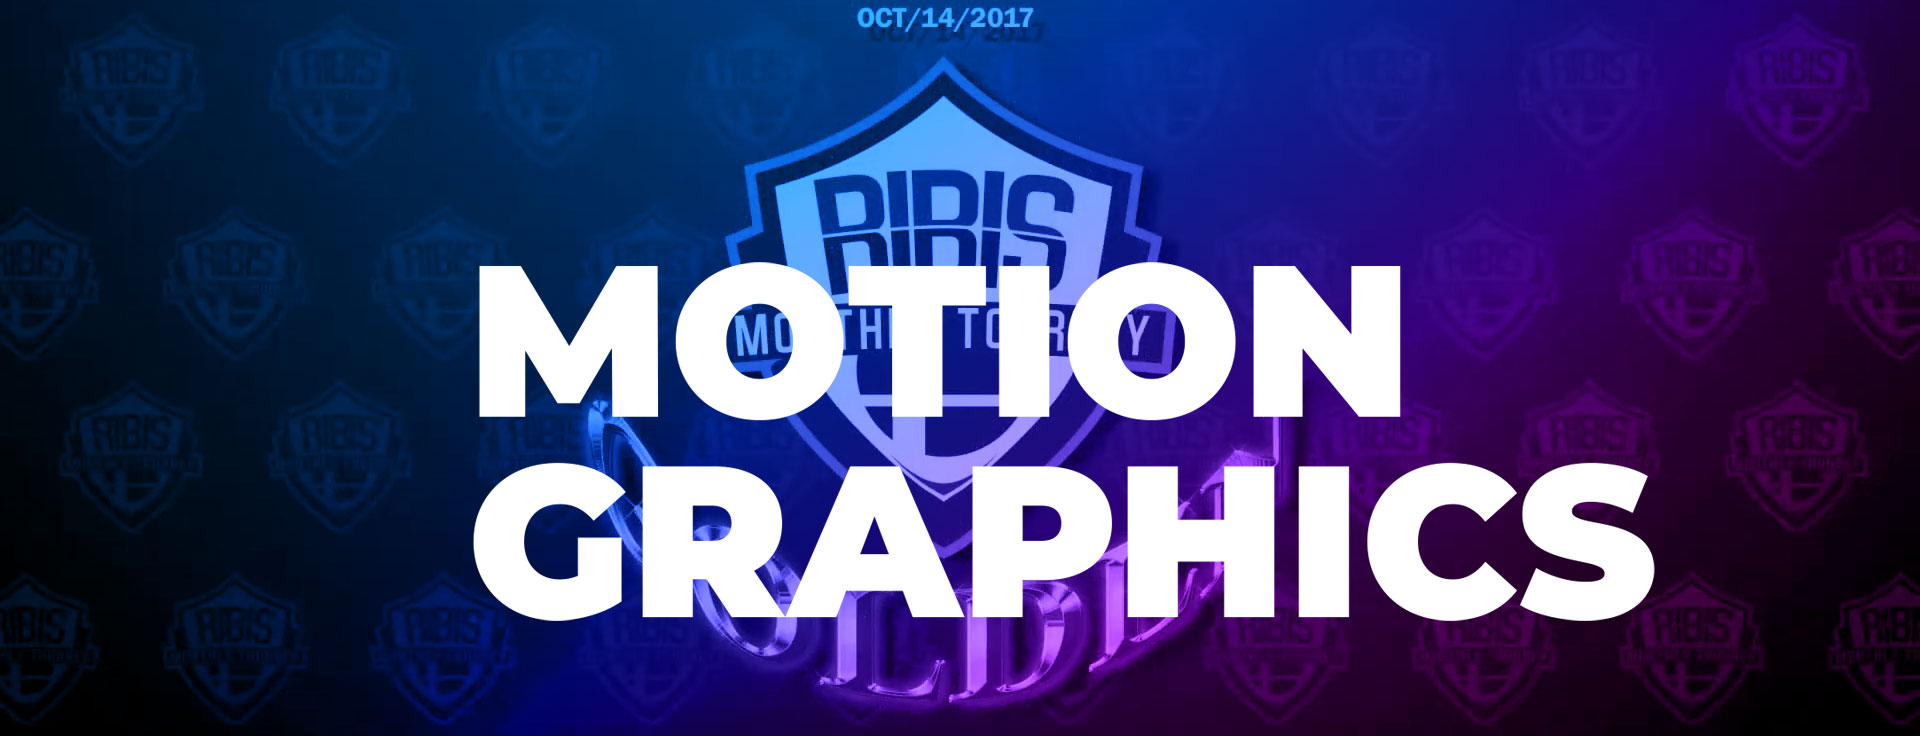 selection motion graphics